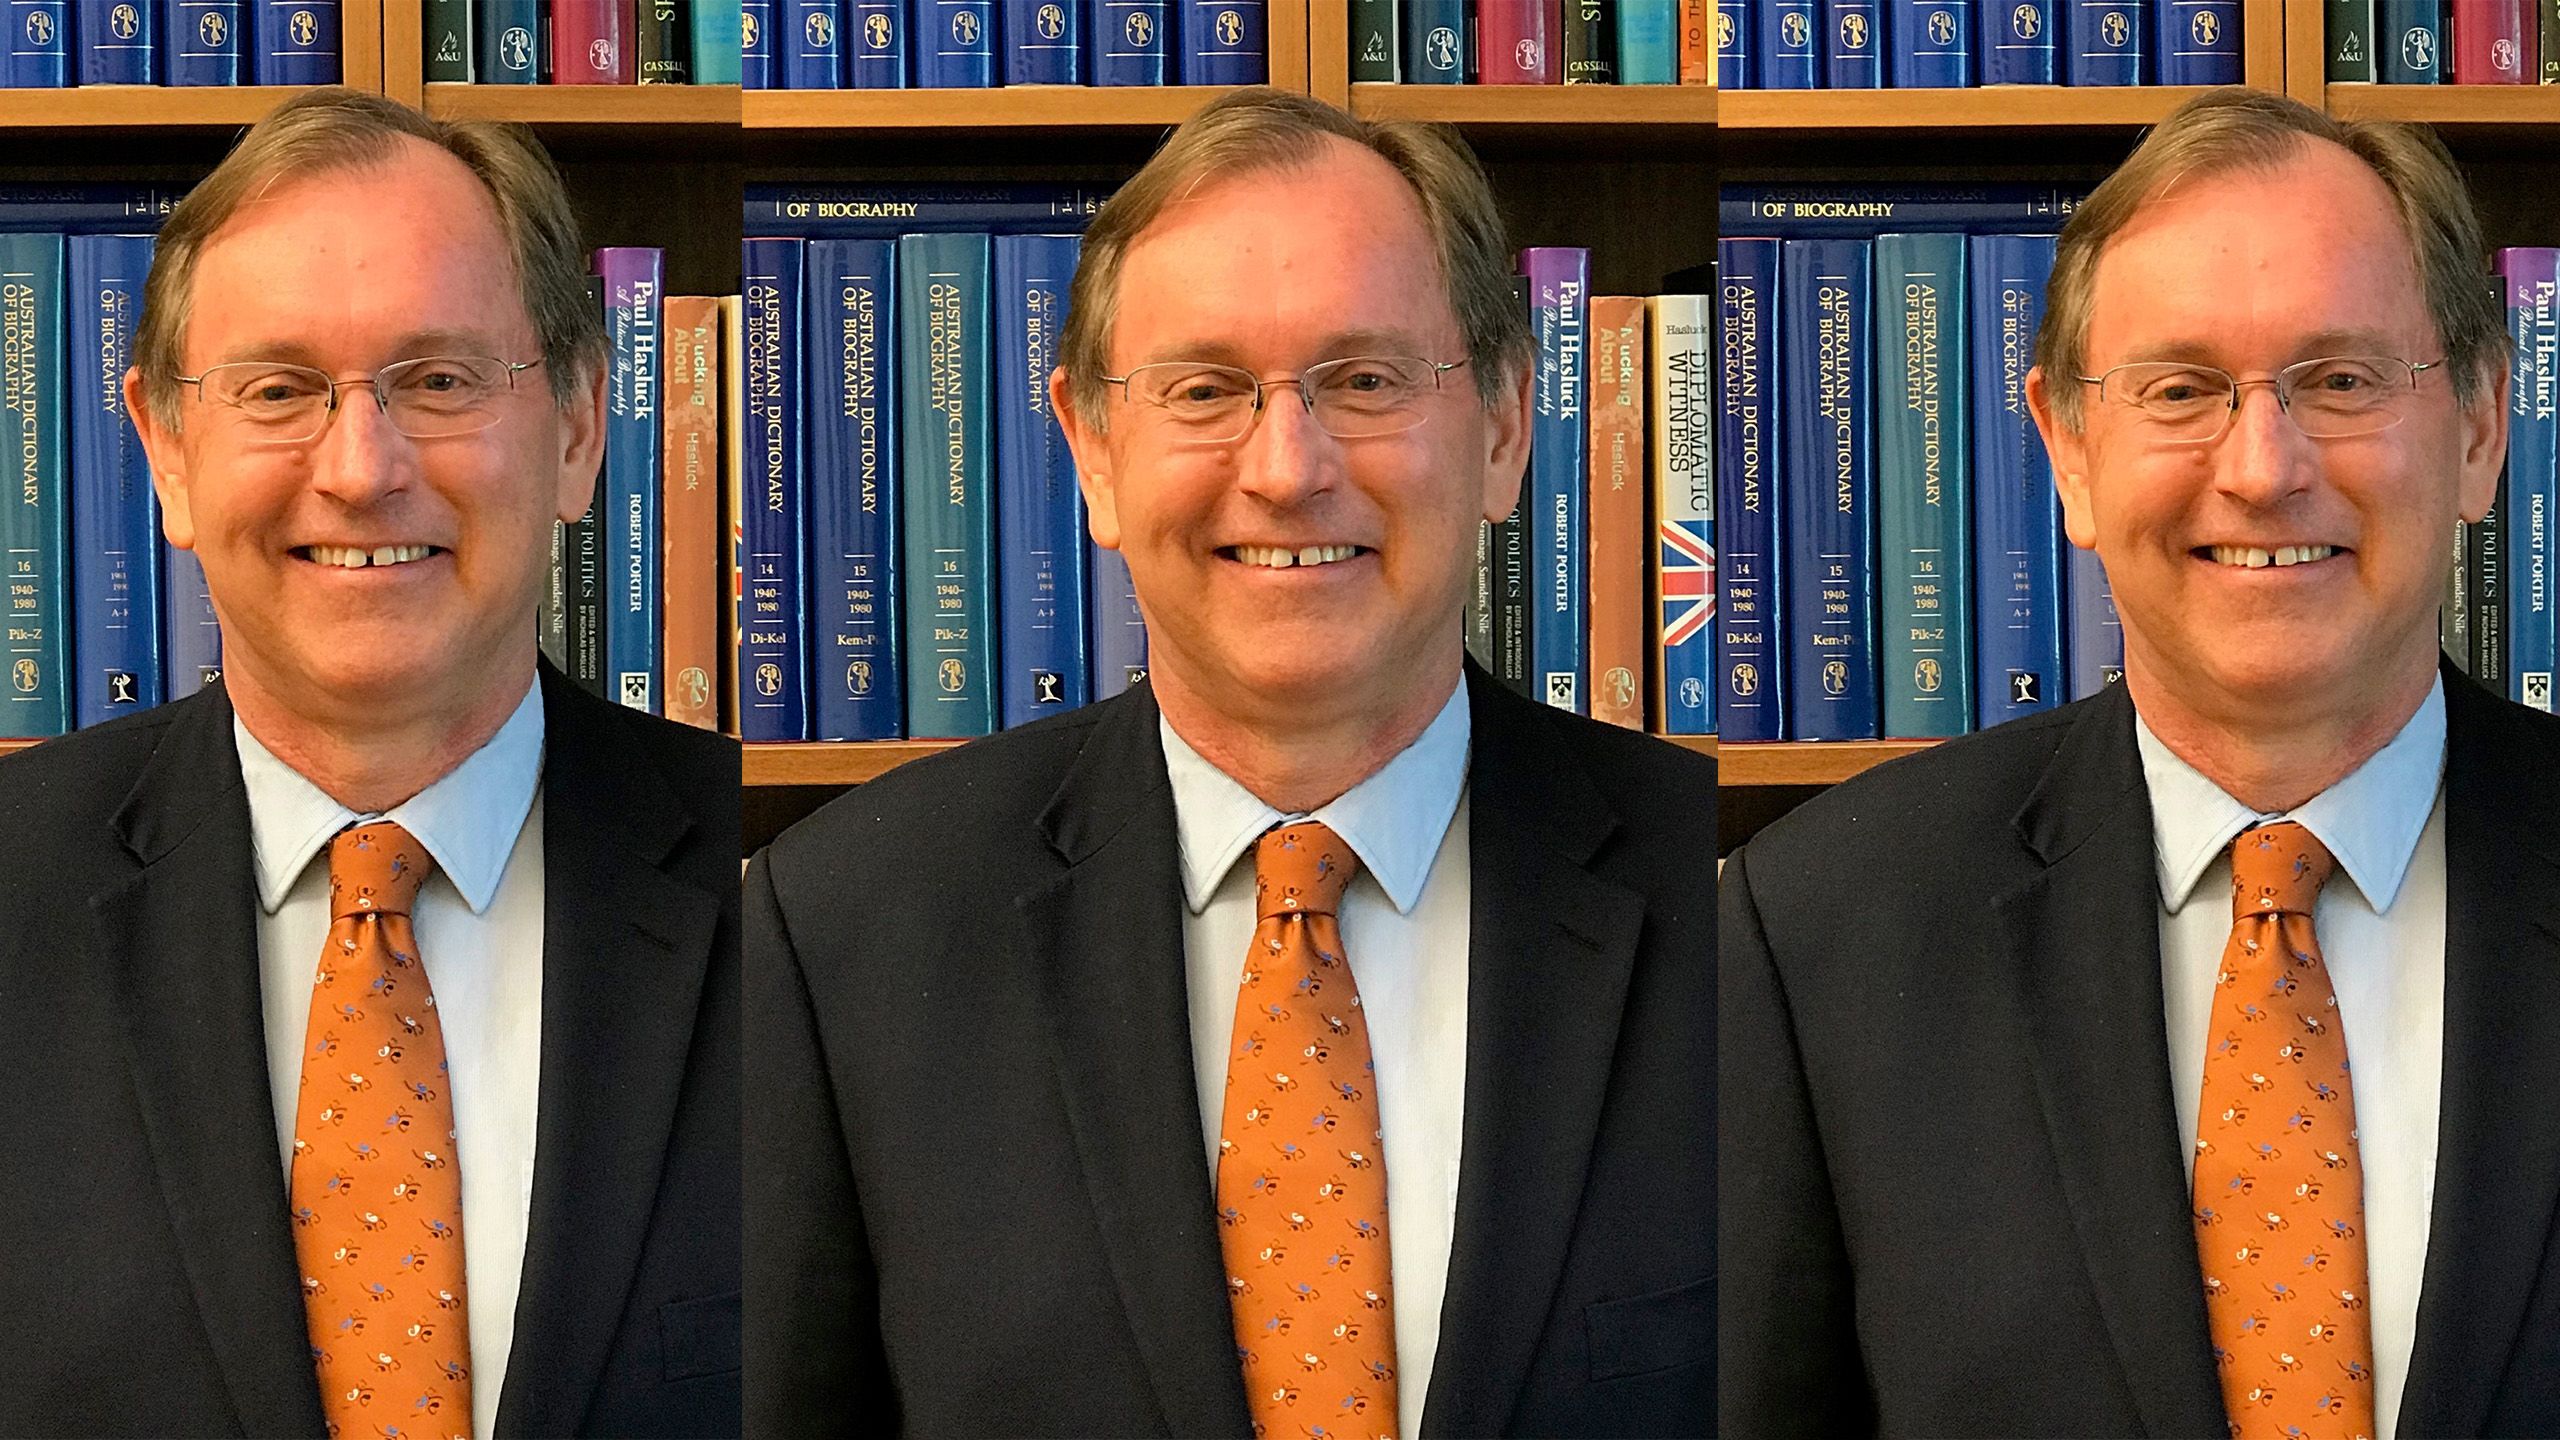 Professor Don Markwell wearing an orange tie and standing in front of a bookcase